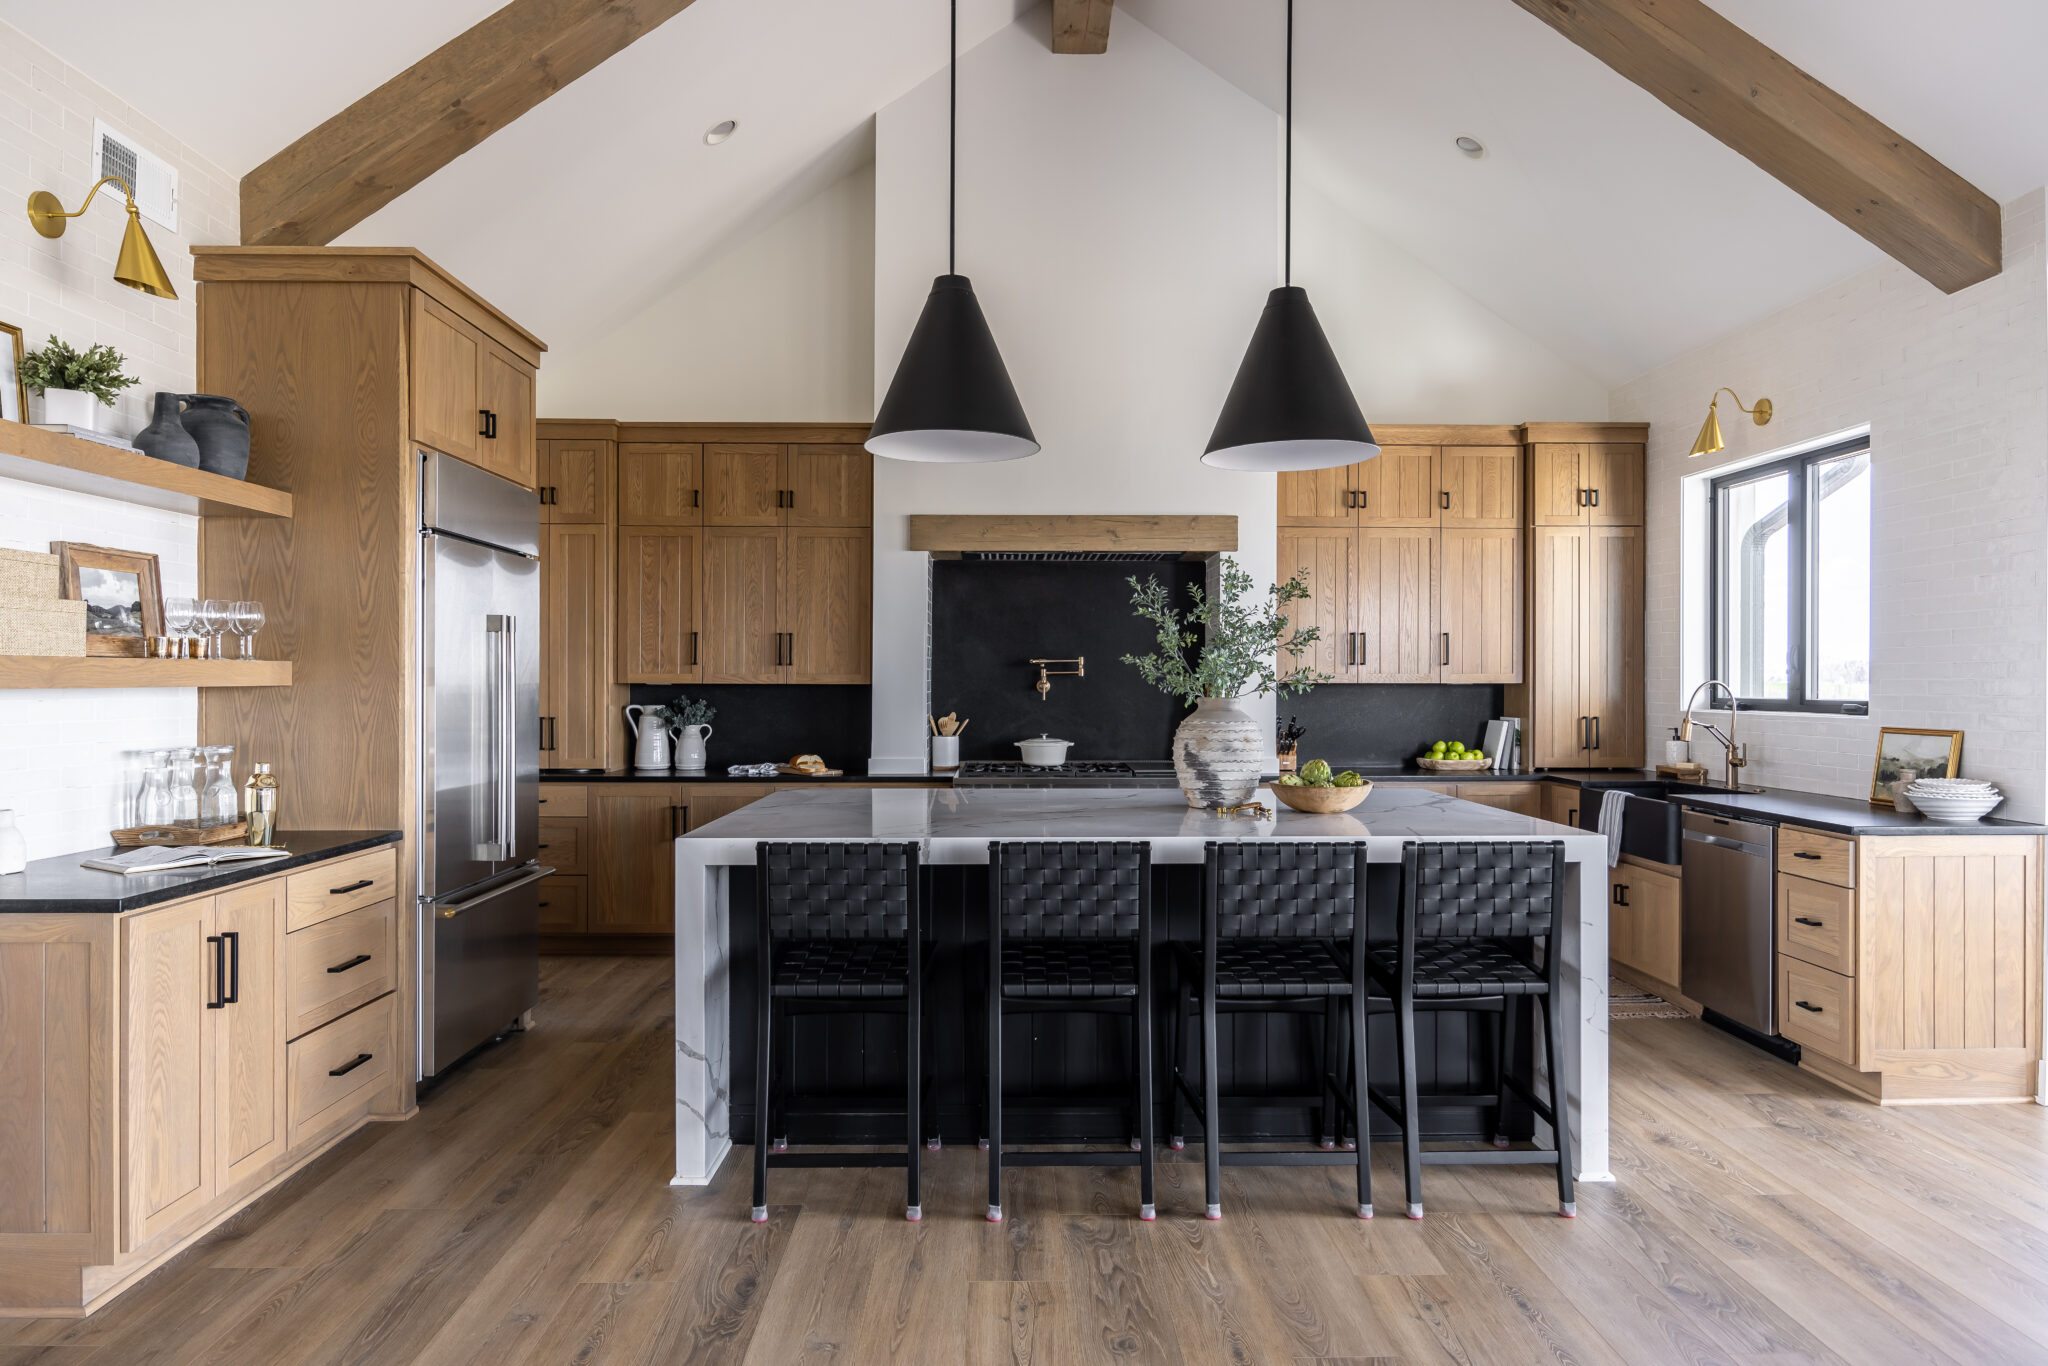 Classic Farmhouse kitchen style with light brown cabinets and black countertop, and white kitchen island